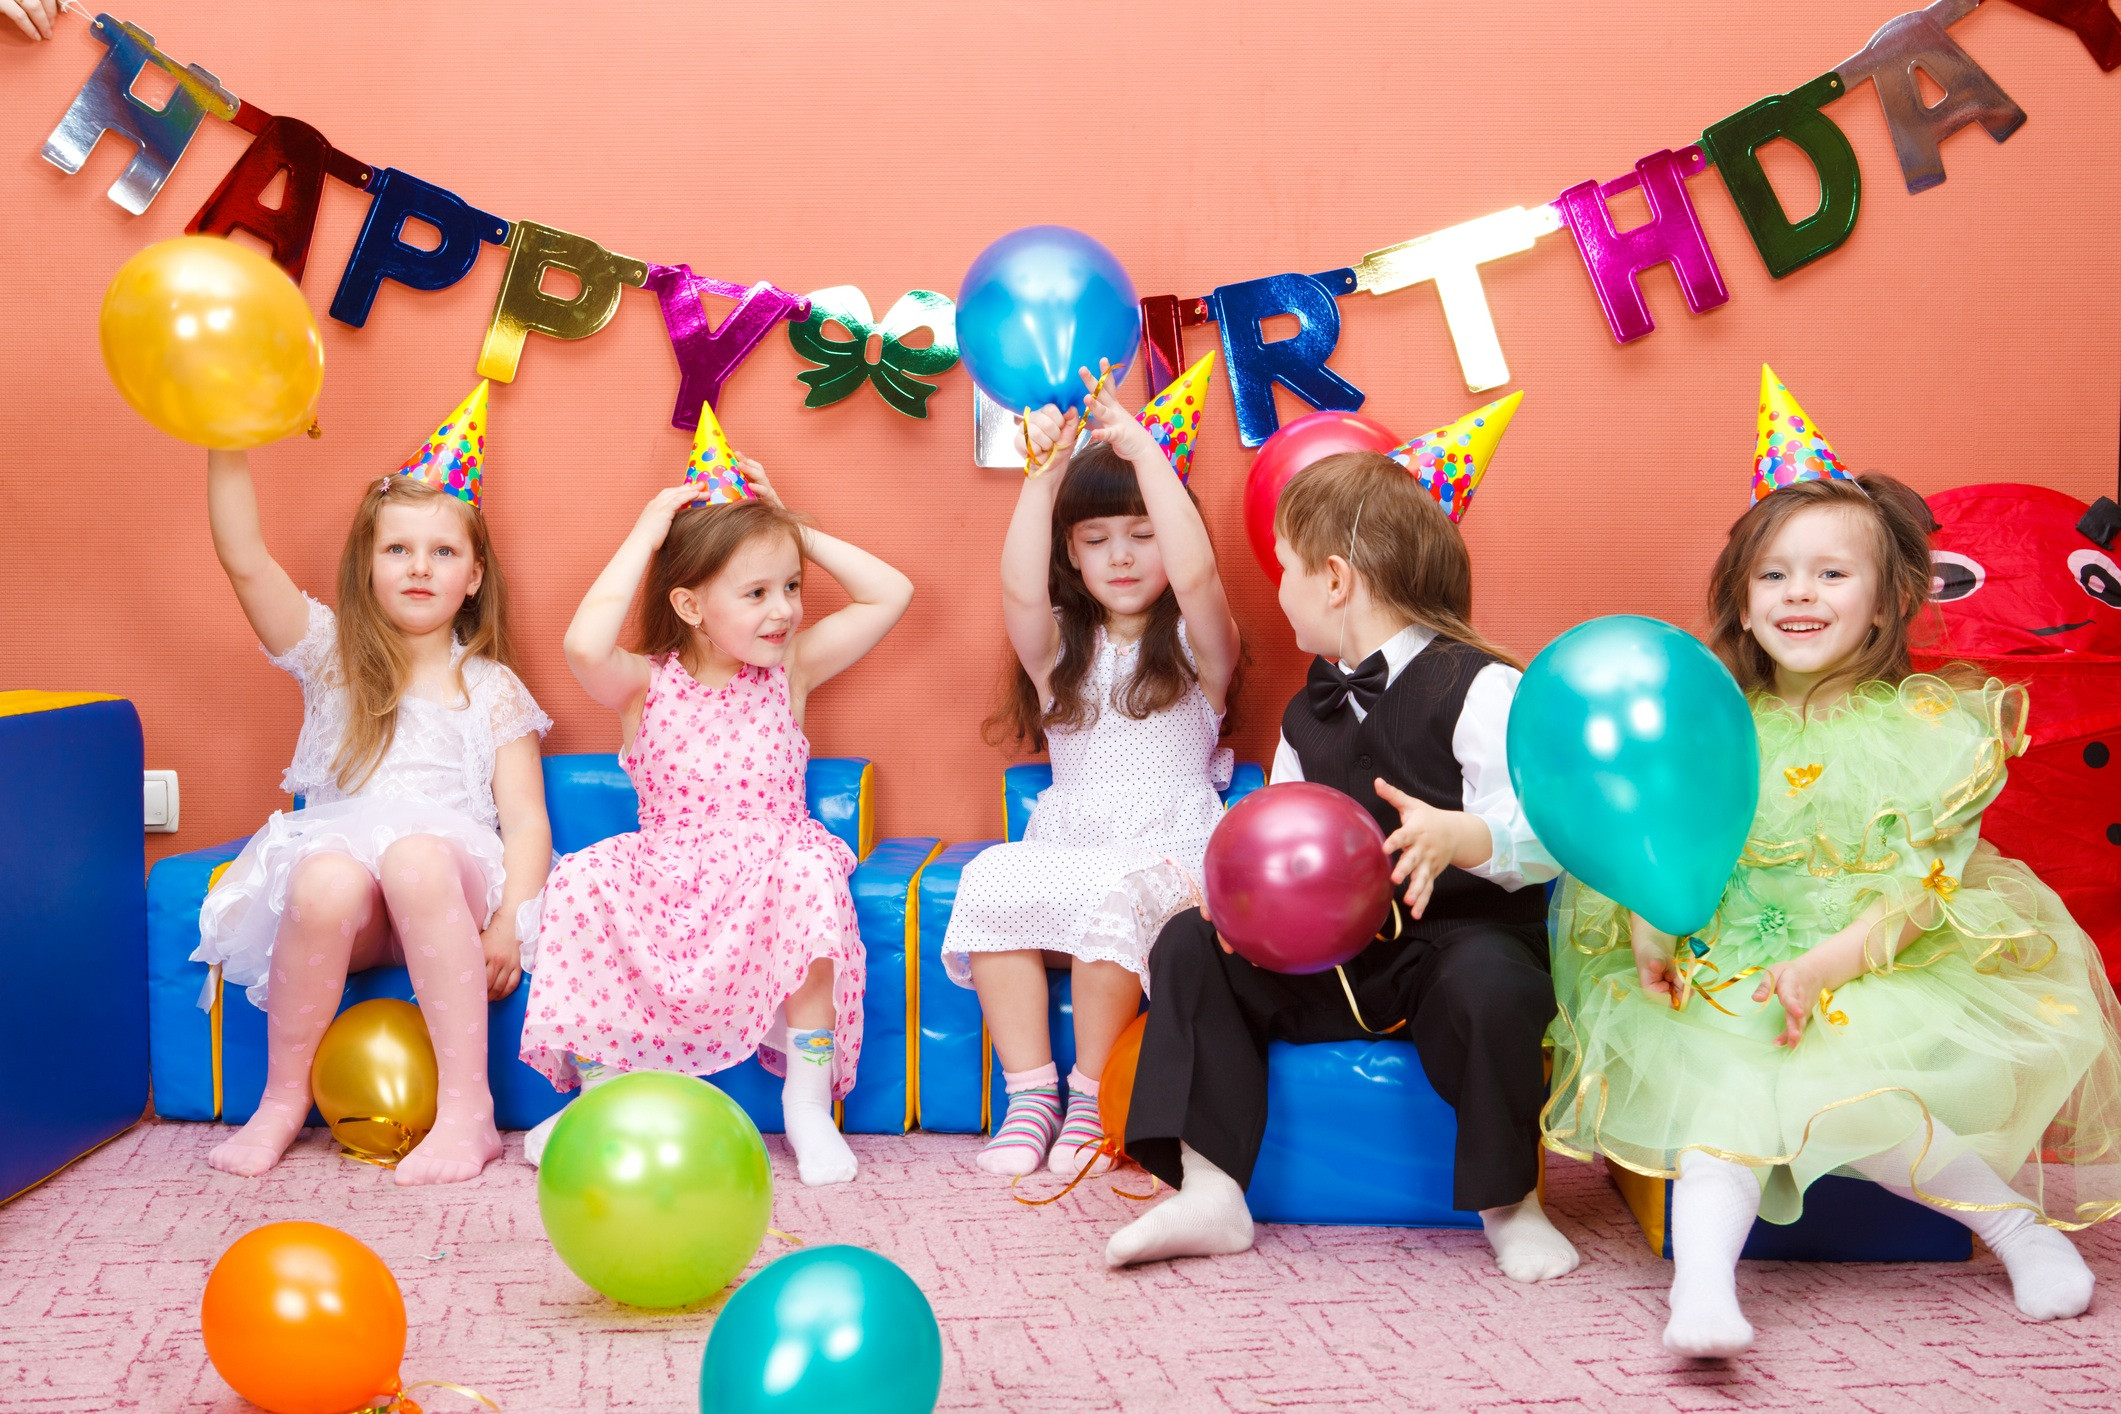 11 Year Old Birthday Party Ideas
 45 Awesome 11 & 12 Year Old Birthday Party Ideas